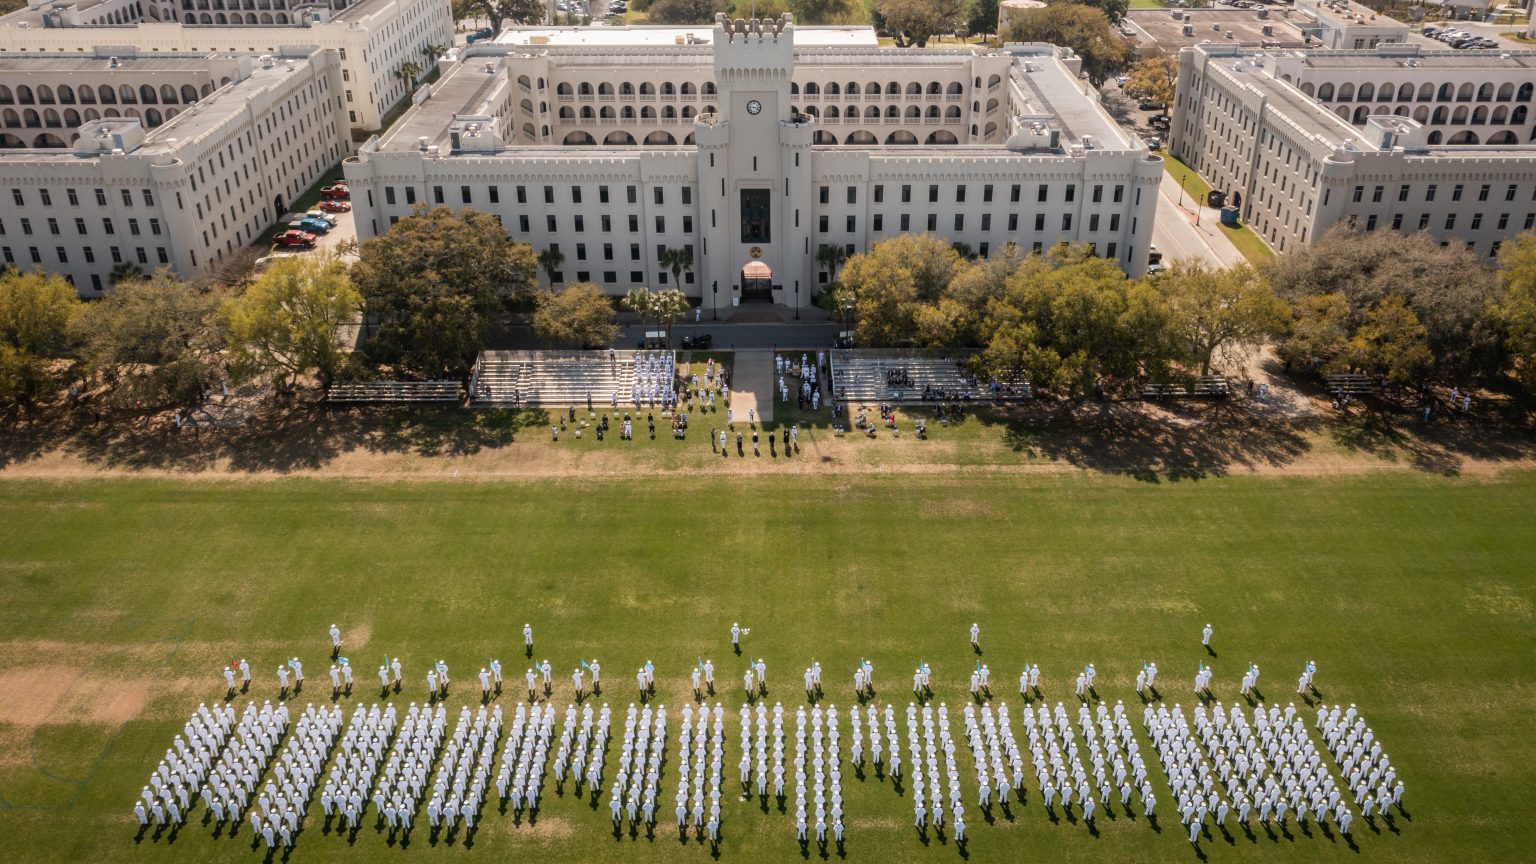 Citadel Class of 2024 renews their oath in socially distanced ceremony - The Citadel Today